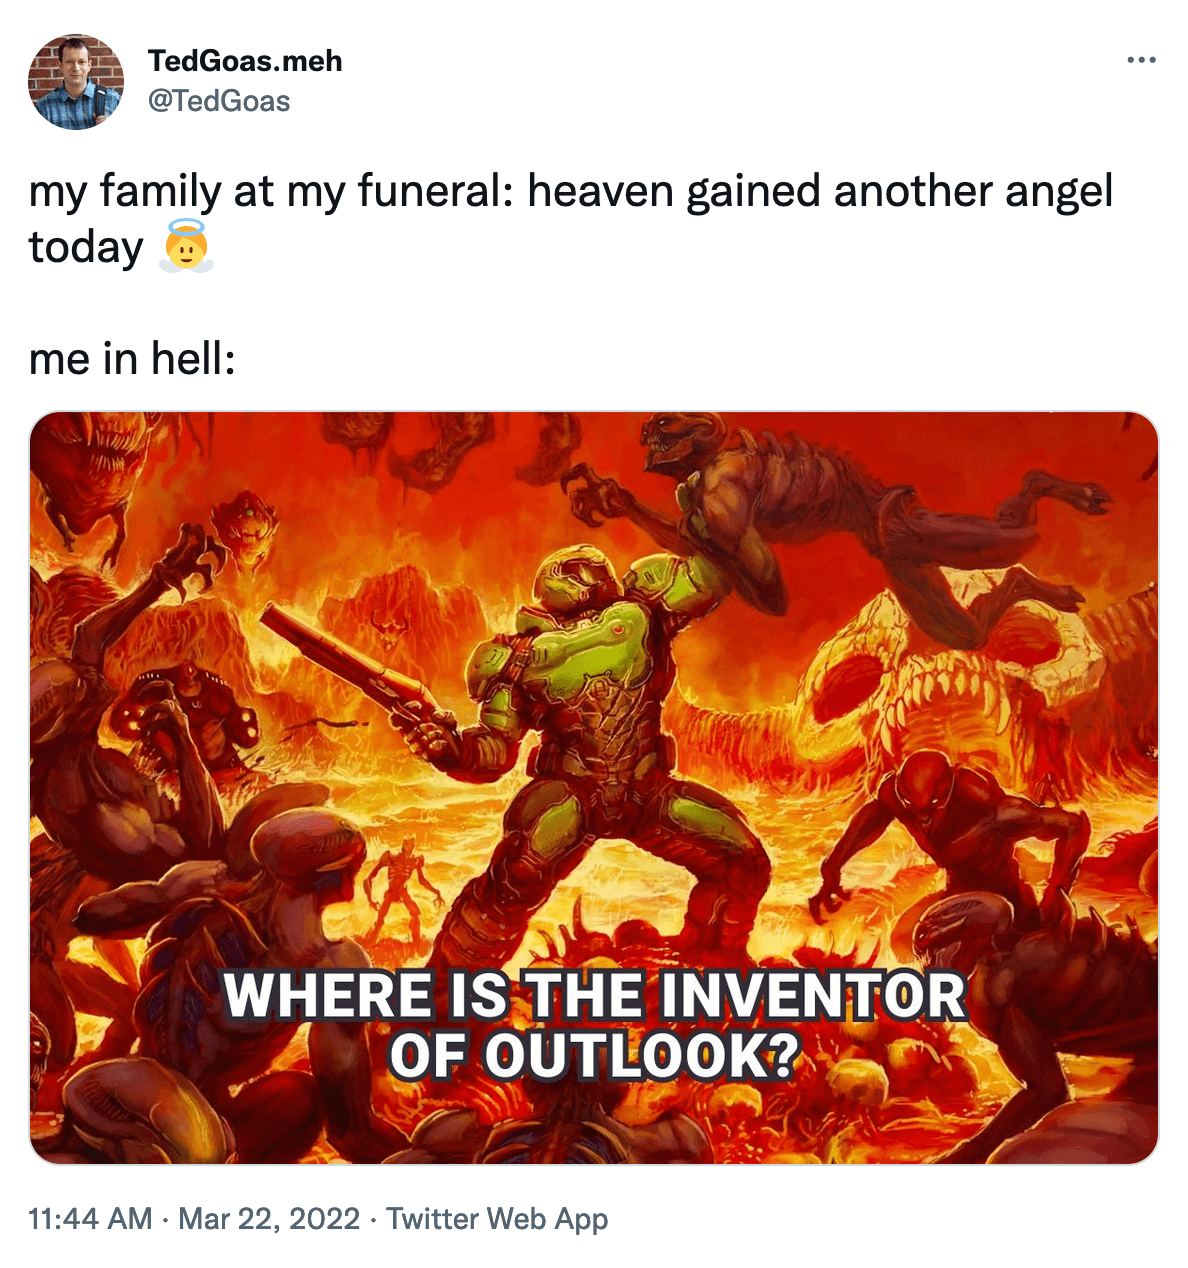 @TedGoas on Twitter: My family at my funeral: heaven gained another angel today. me in hell: Doom Marine fighing off demons with the caption: Where is the inventor of Outlook?